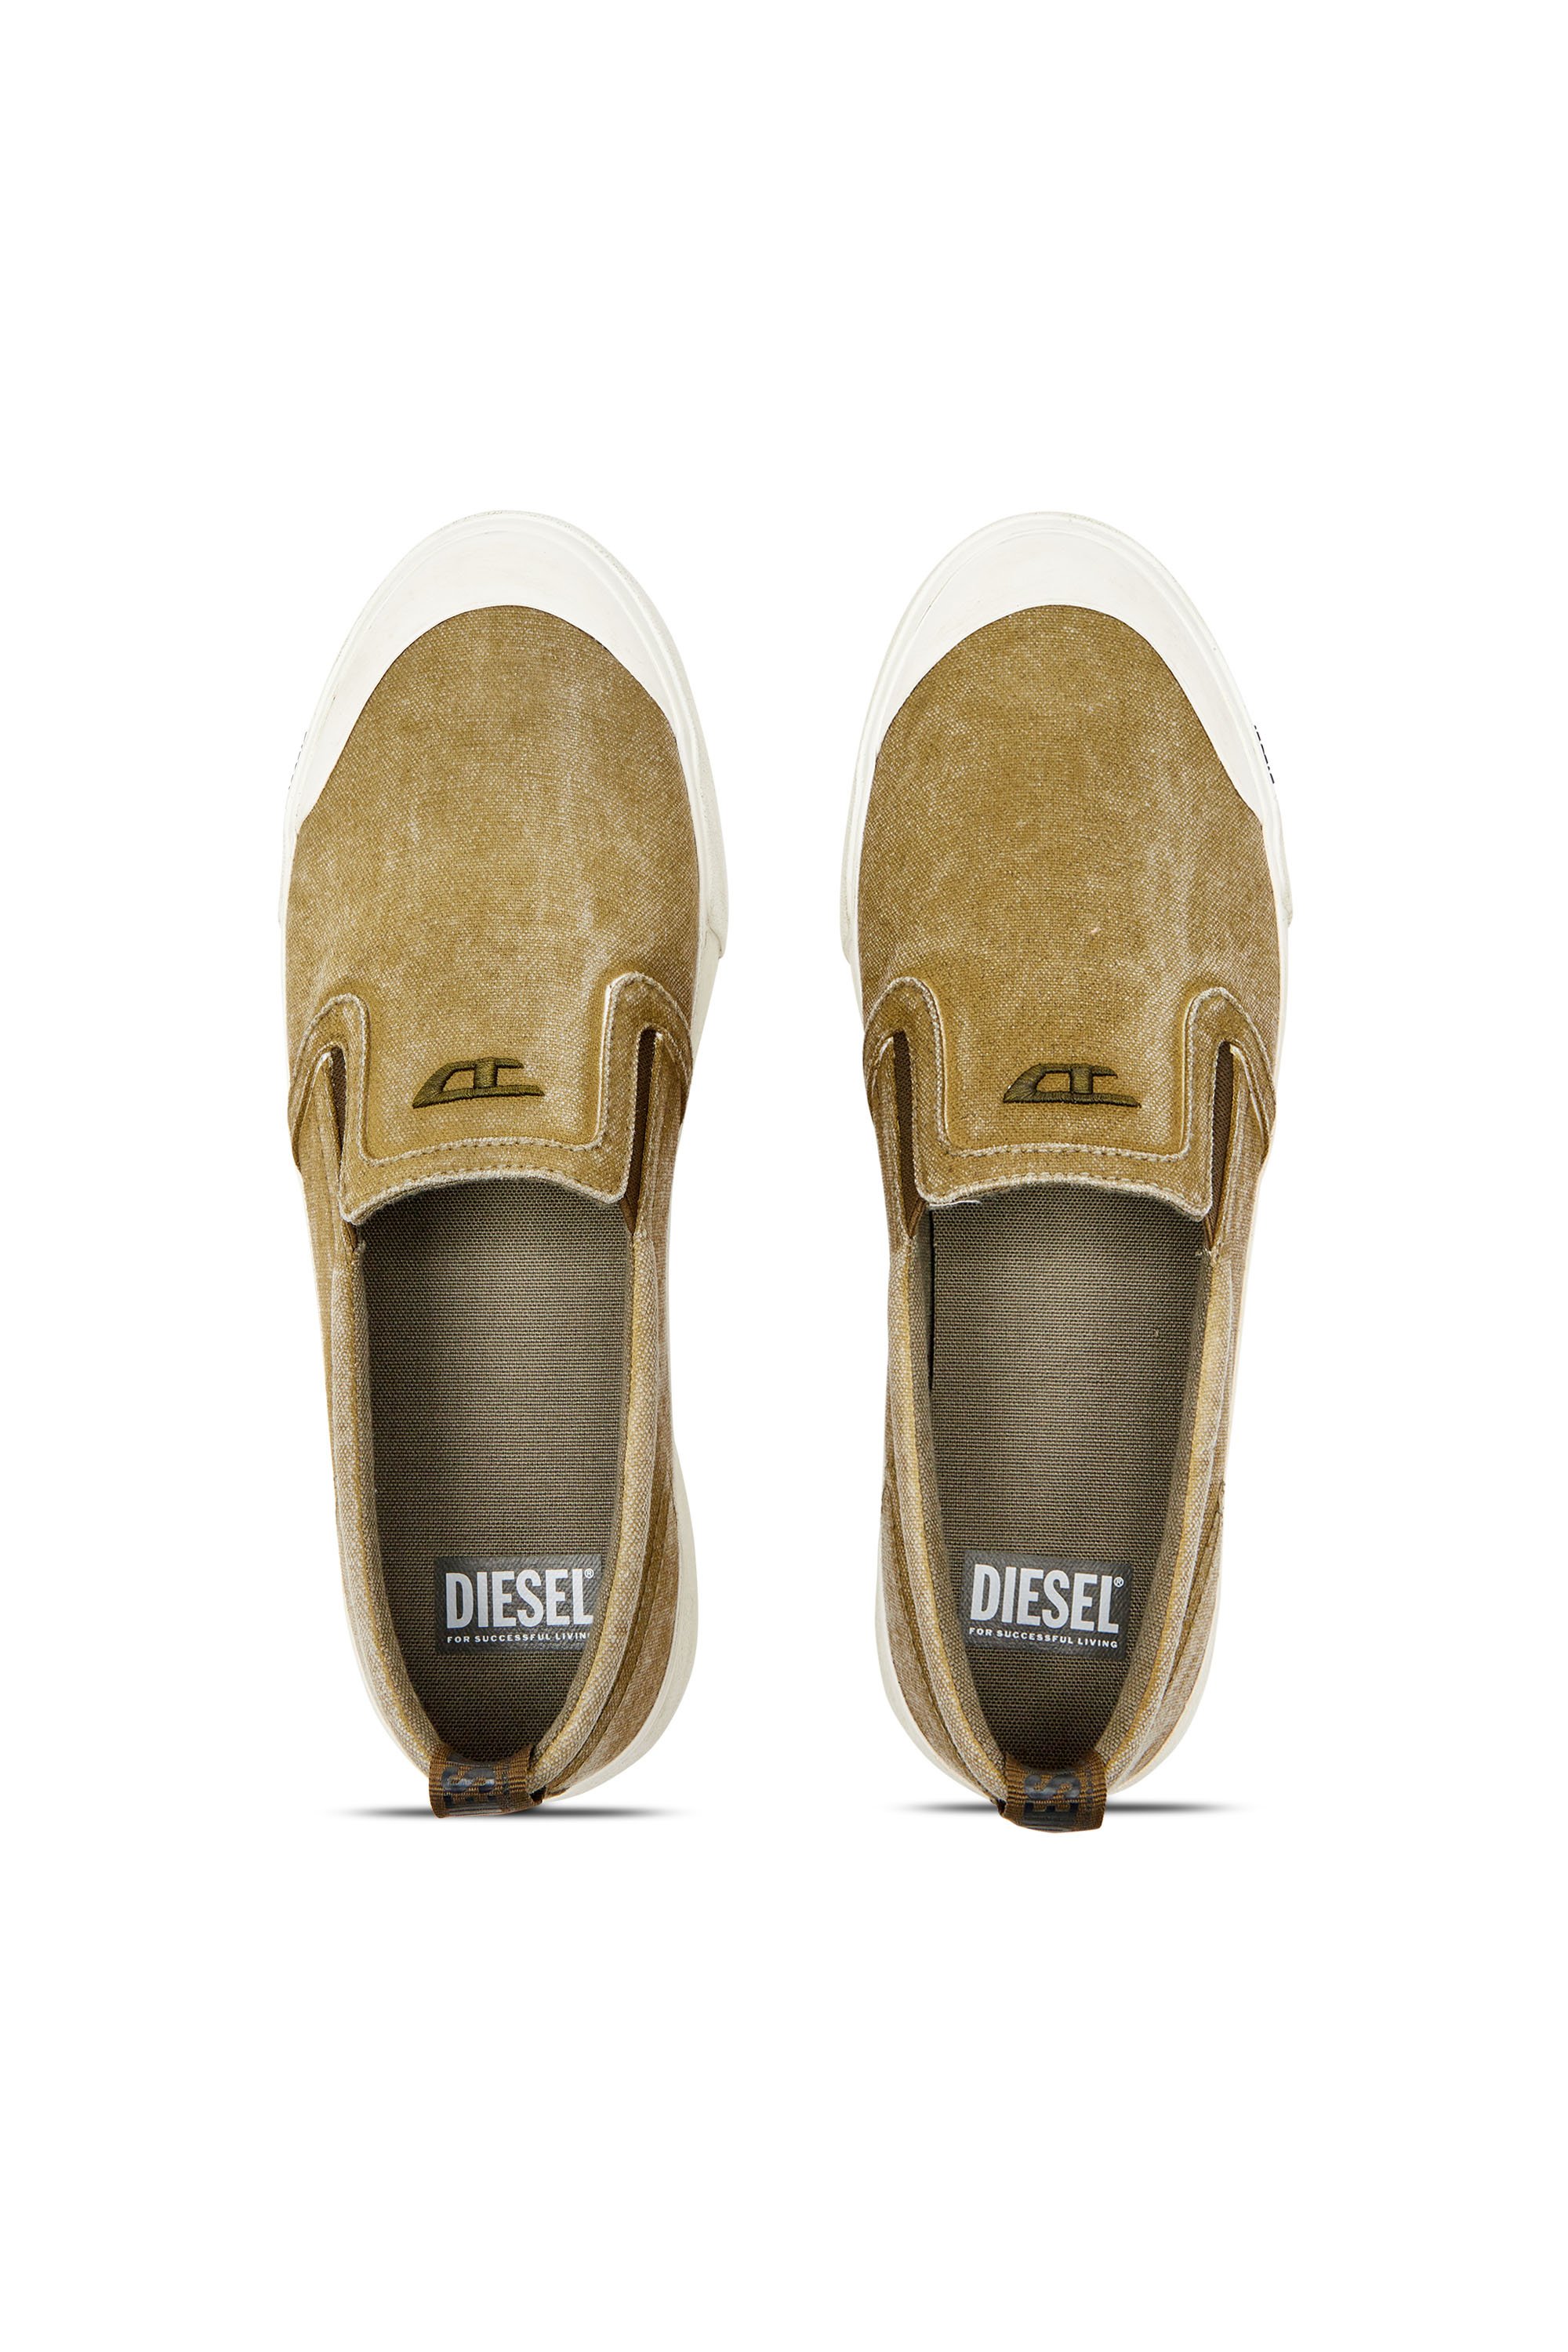 Diesel - S-ATHOS SLIP ON, Man Canvas slip-on sneakers with D embroidery in Brown - Image 5